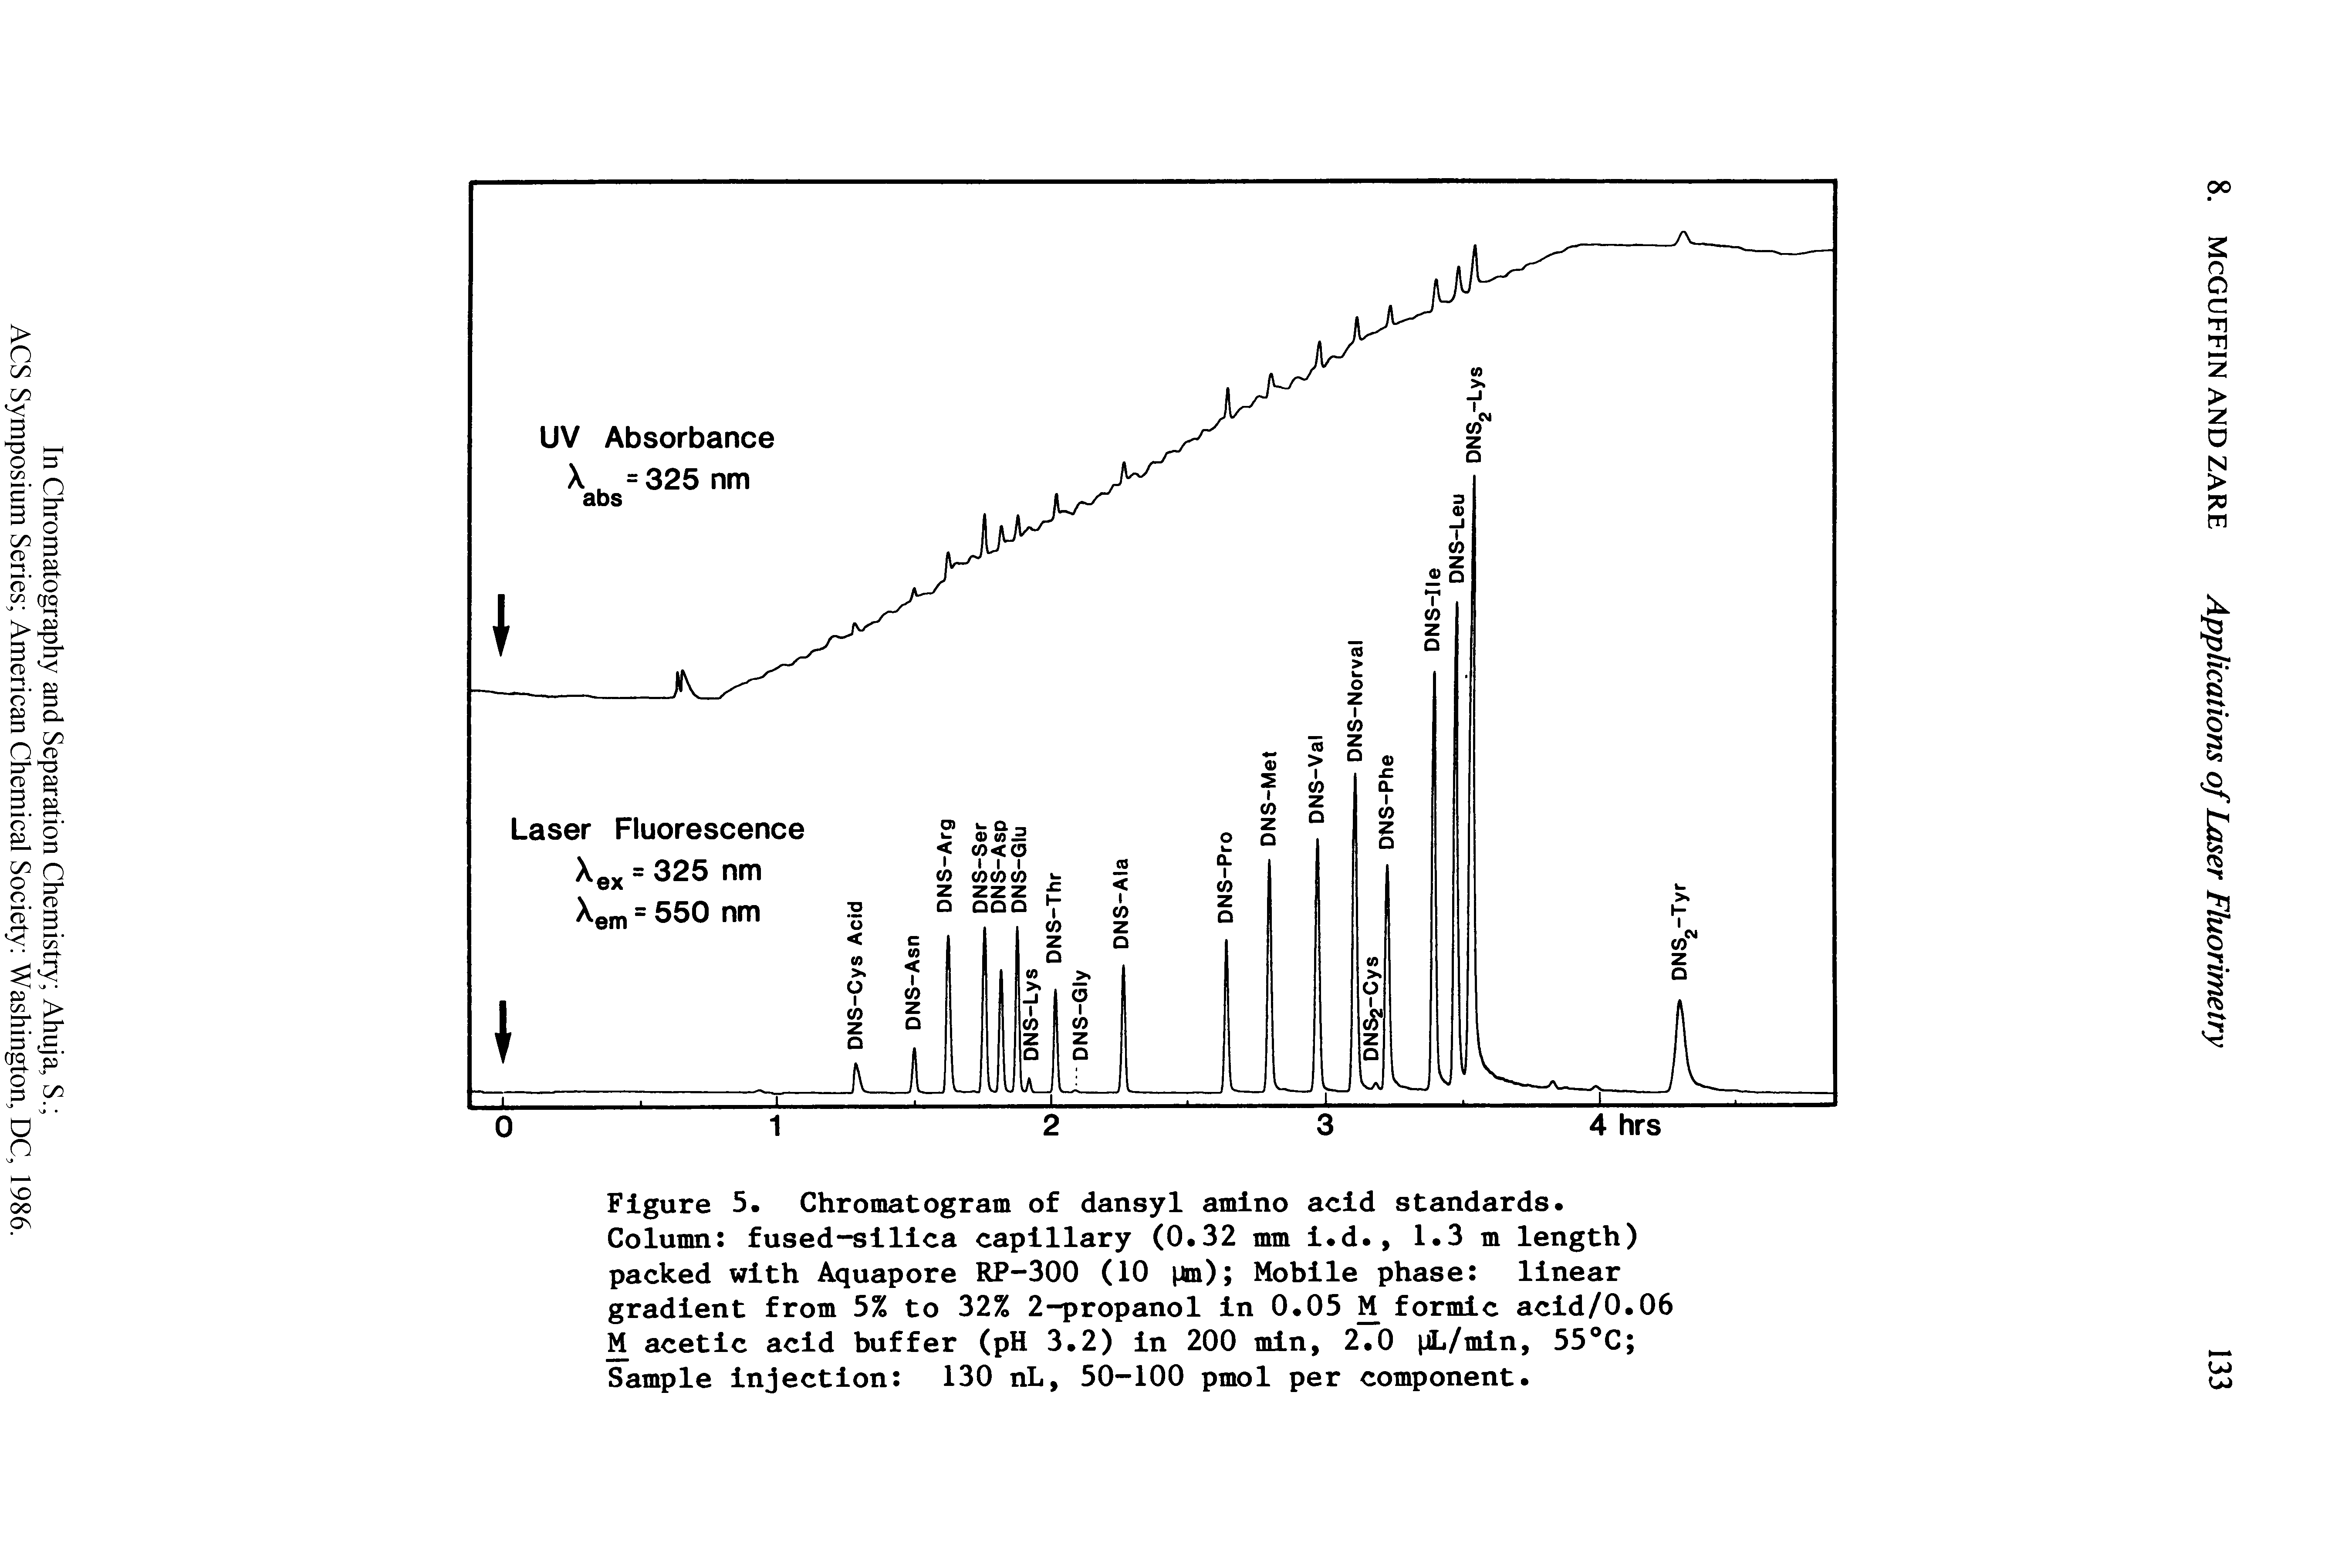 Figure 5. Chromatogram of dansyl amino acid standards. Column fused-silica capillary (0.32 mm i.d., 1.3 m length) packed with Aquapore RP-300 (10 jim) Mobile phase linear gradient from 5% to 32% 2-propanol in 0.05 M formic acid/0.06 M acetic acid buffer (pH 3.2) in 200 min, 2.0 pL/min, 55 C Sample injection 130 nL, 50-100 pmol per component.